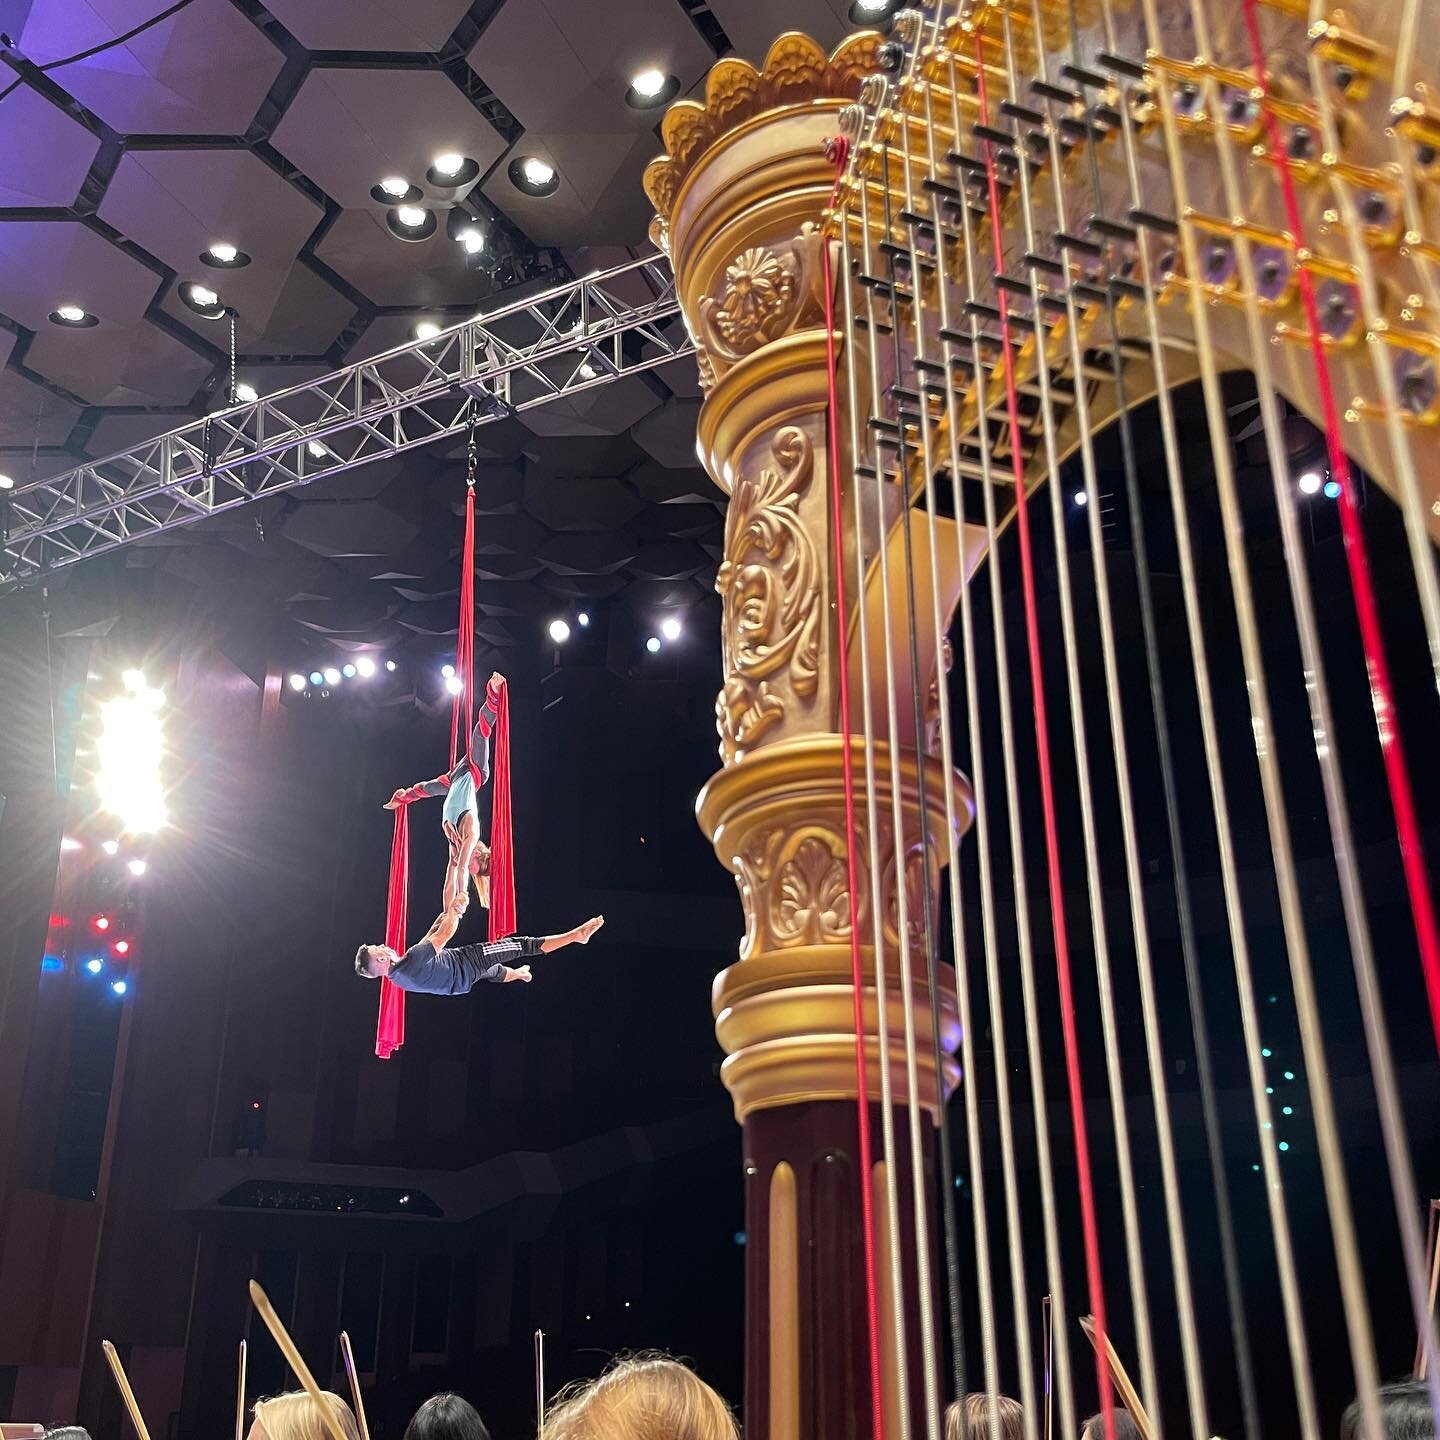 Sometimes not playing is actually preferred 😋. Looking forward to three shows of @cirquedelasymphonie with @housymphony this weekend! Thrilled to basically be an on-stage audience member for the majority of this show.